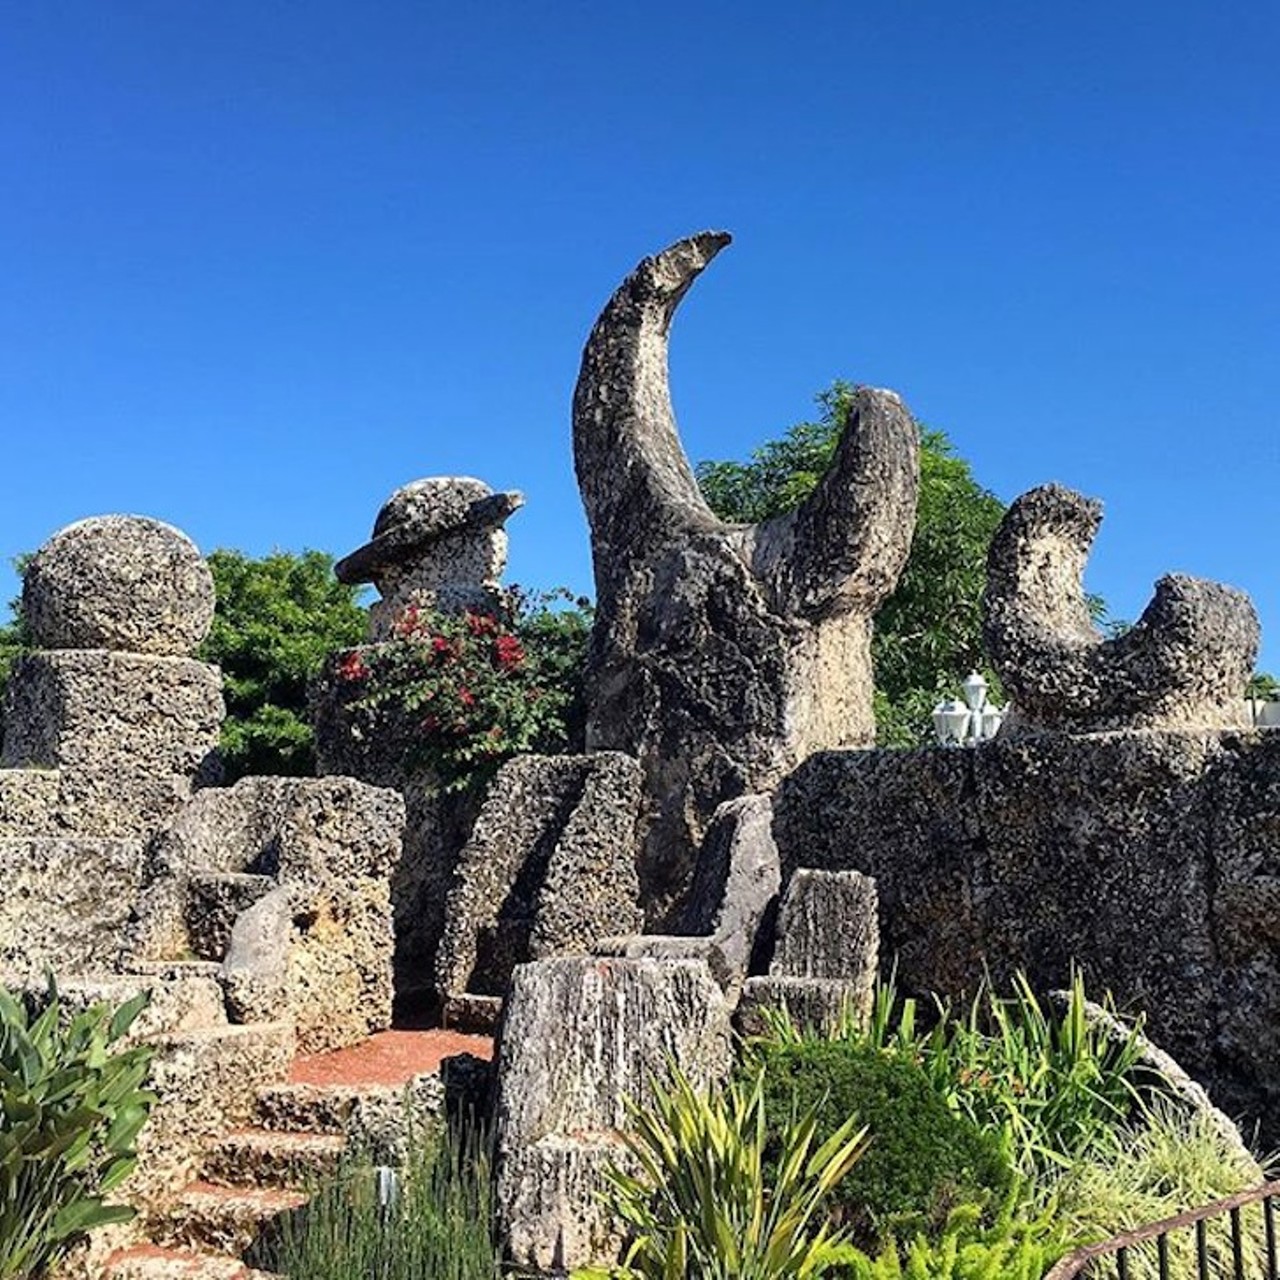 Coral Castle
28655 S Dixie Hwy, Homestead, FL 33033 | (305) 248-6345 
After his beloved Agnes left him a day before their wedding, early 1900s sculptor Ed Leedskalnin took 30 years to handcut gigantic pieces of stone into the works of art that you see today at Coral Castle. The whimsical shapes and designs made from rigid stone are perplexing to say the least. 
Photo via happy_less/Instagram